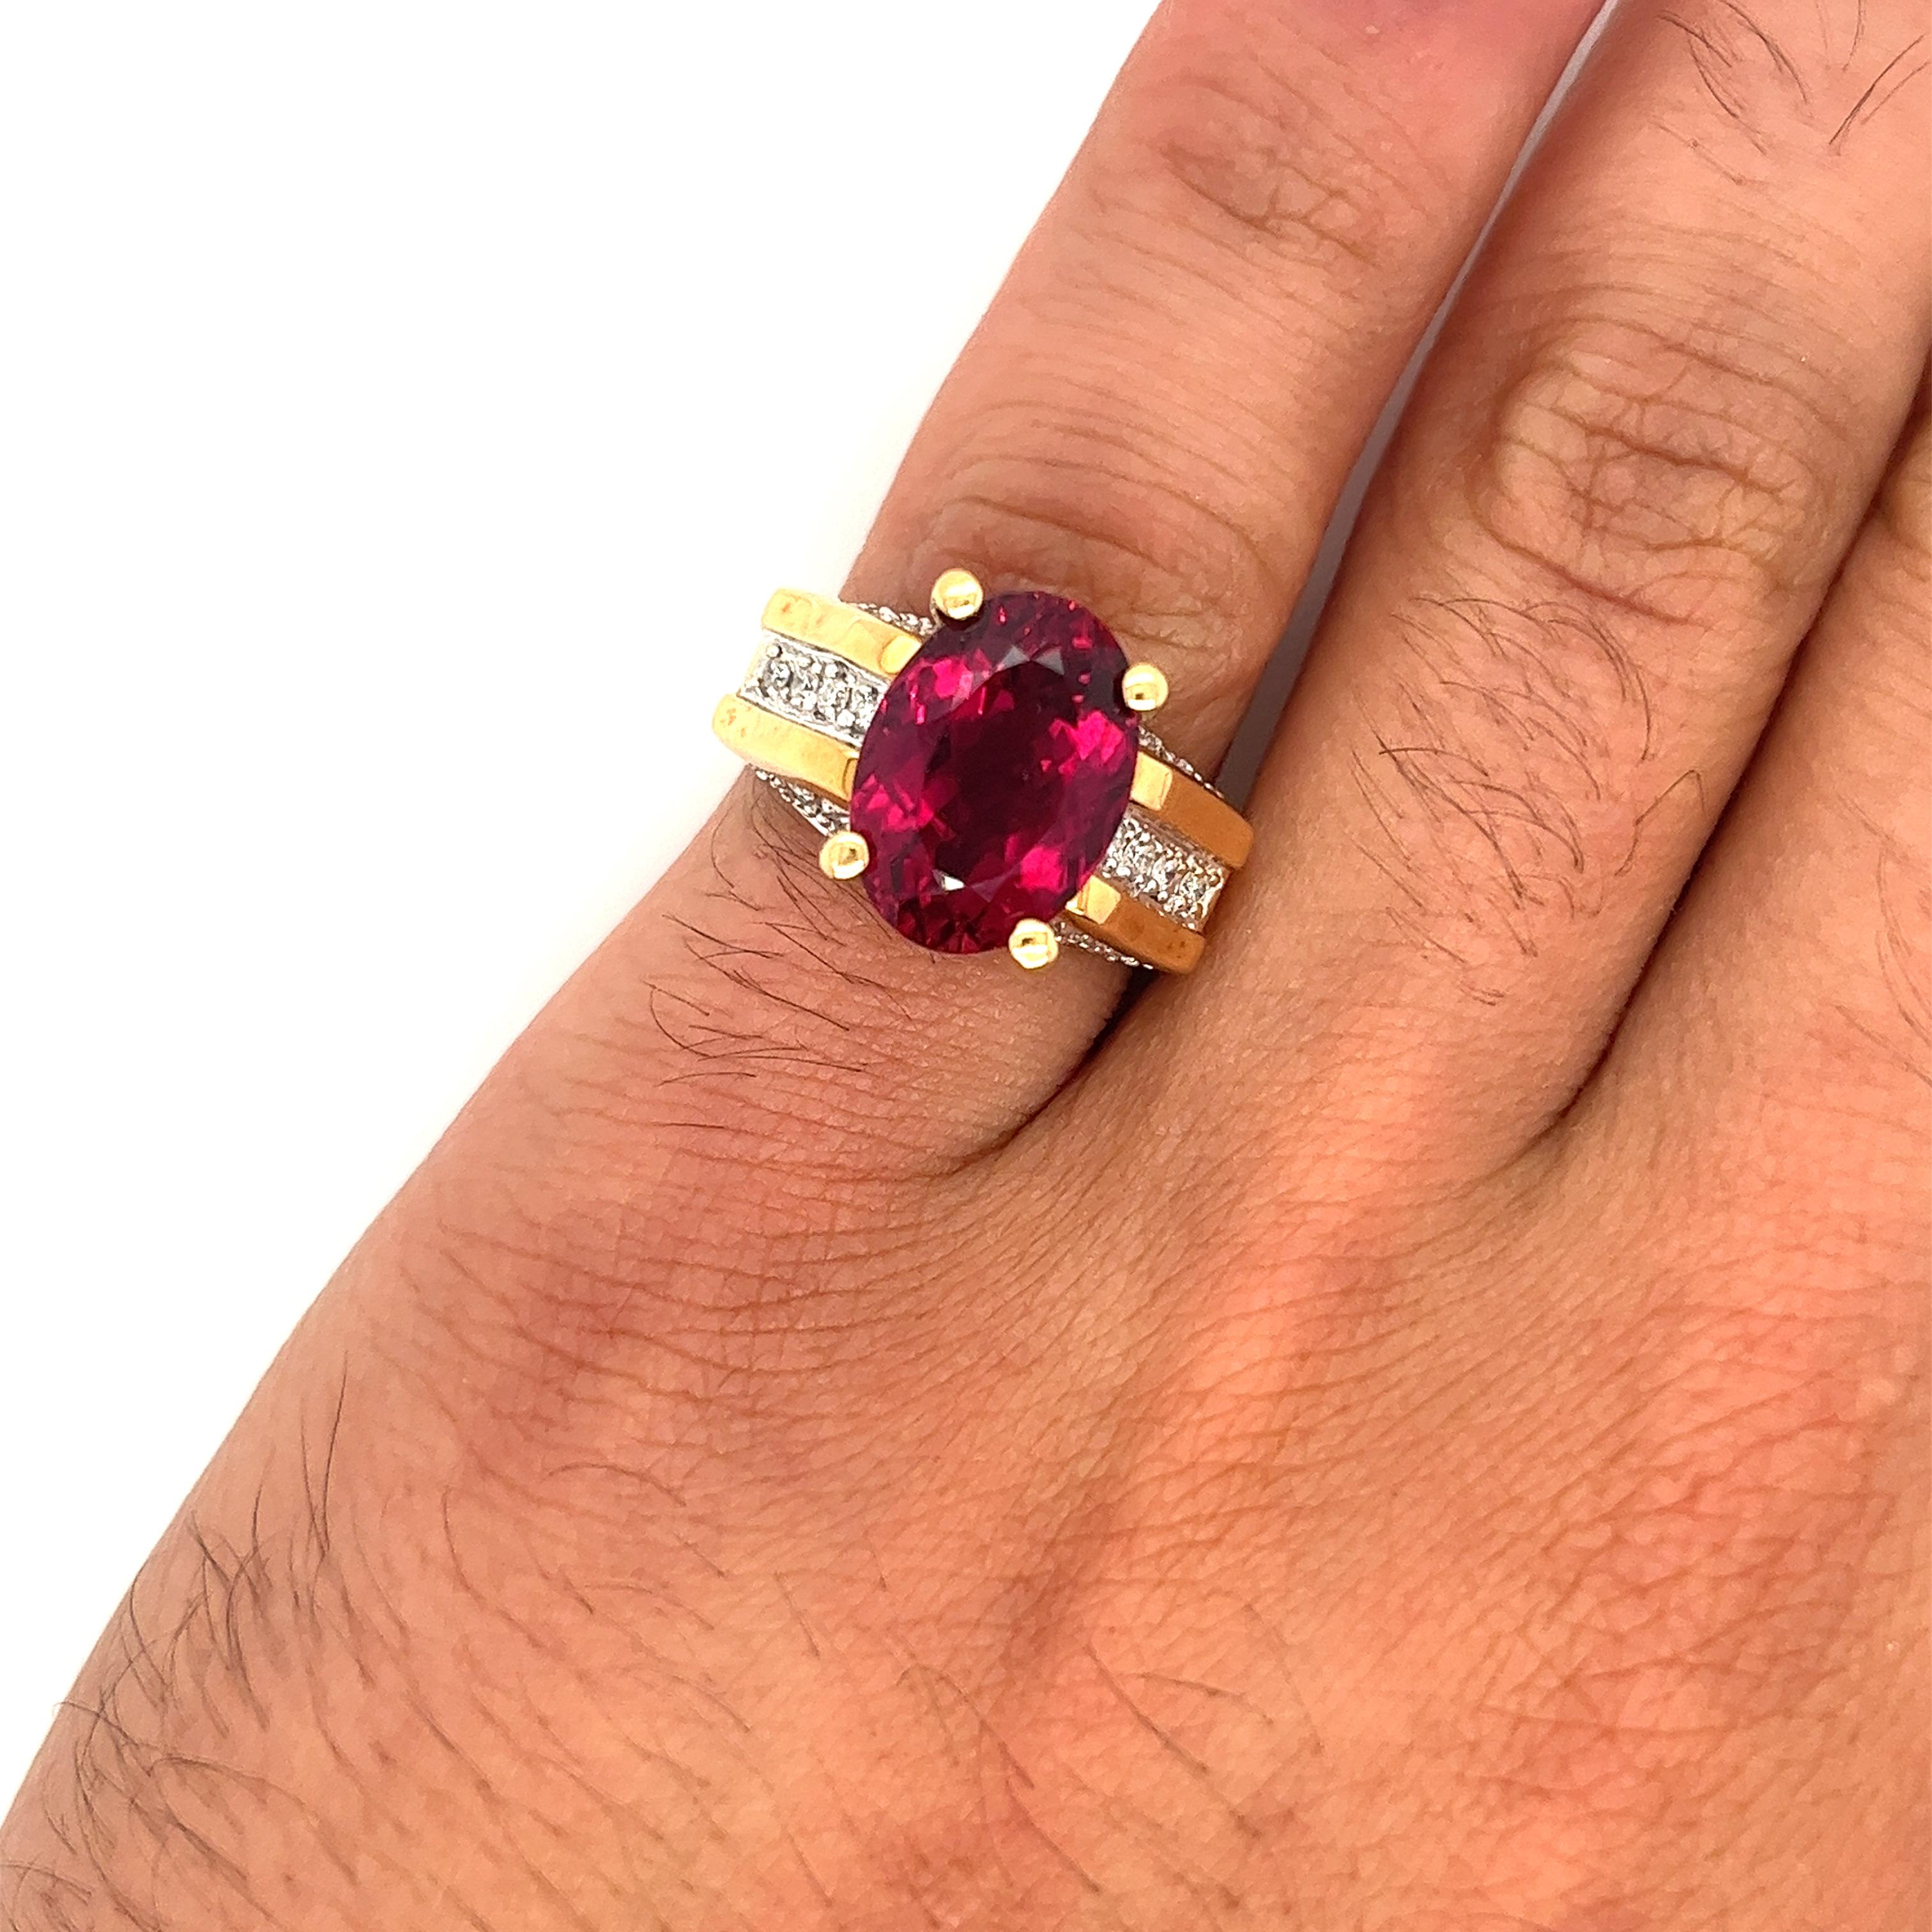 GIA Cert Oval Cut 7 Carat Purplish Red Tourmaline Ring with Diamond in 18K Gold For Sale 3